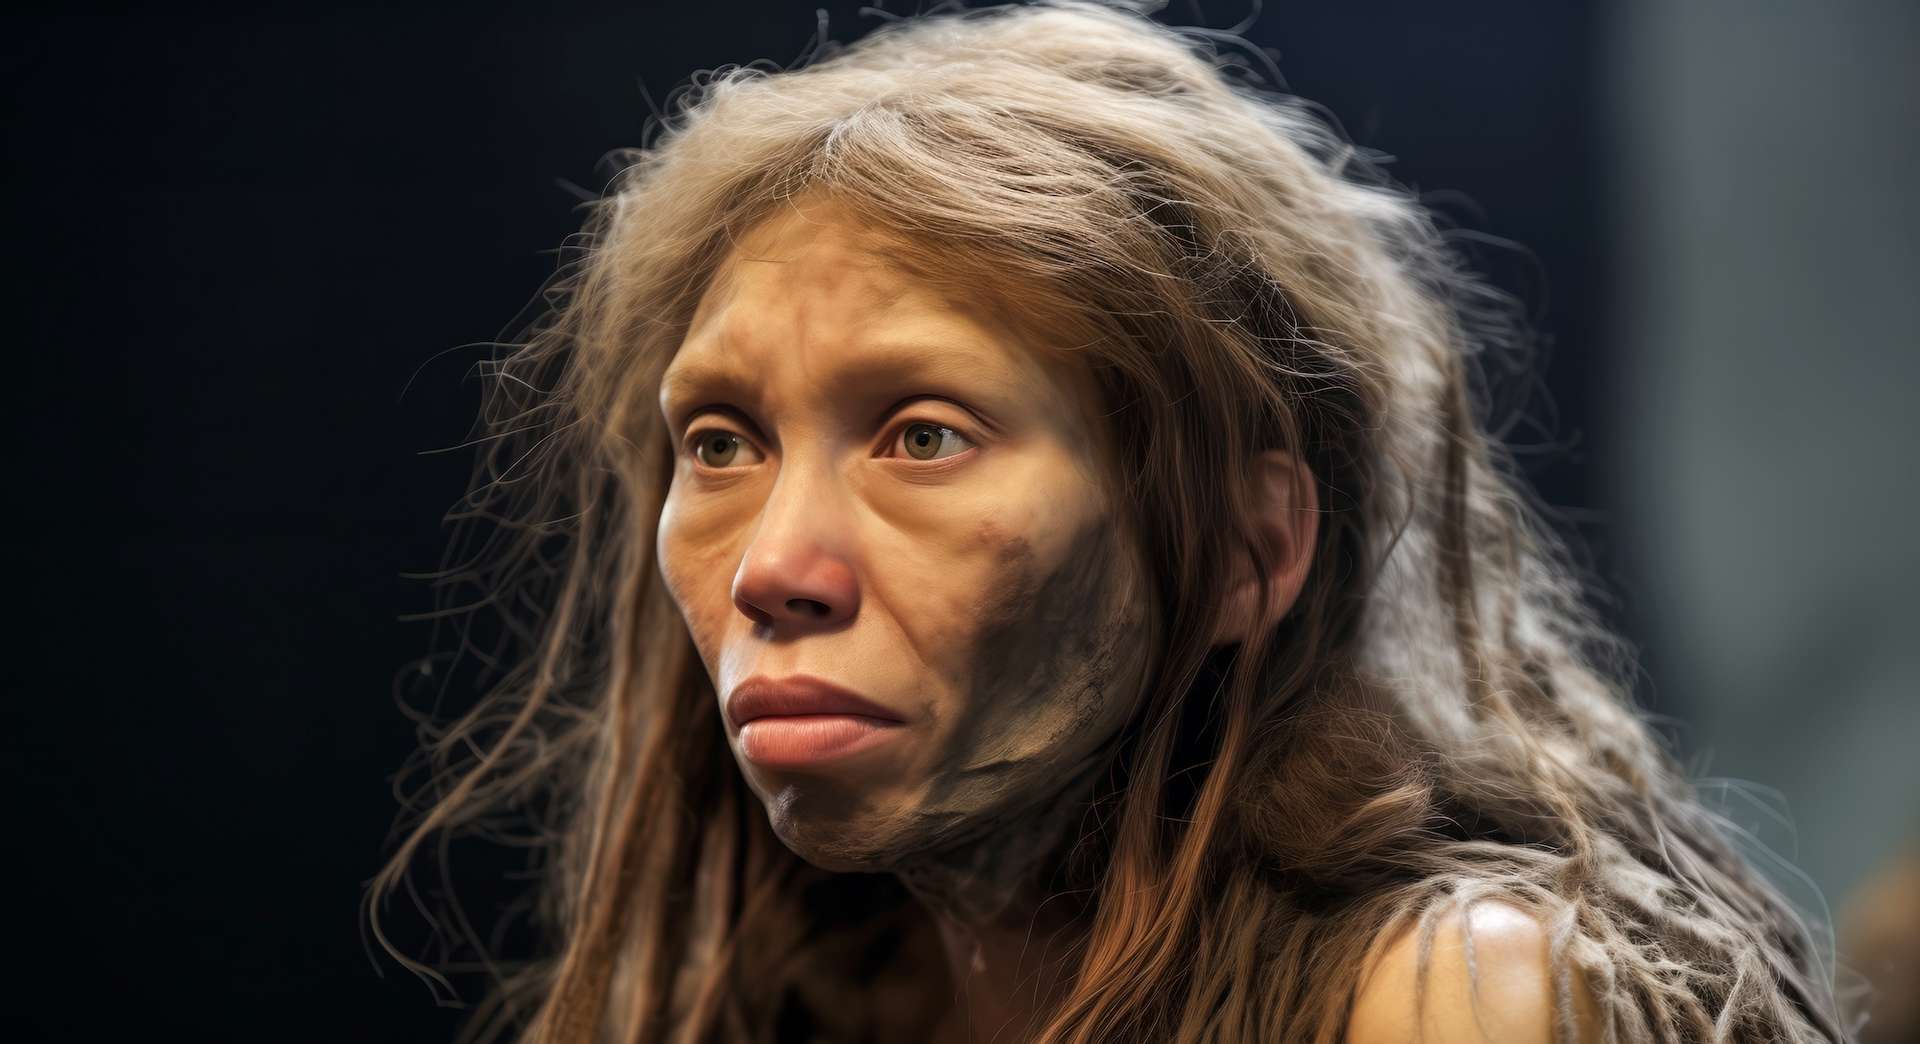 Neanderthals 50,000 years ago carried the same viruses as us, and this raises questions